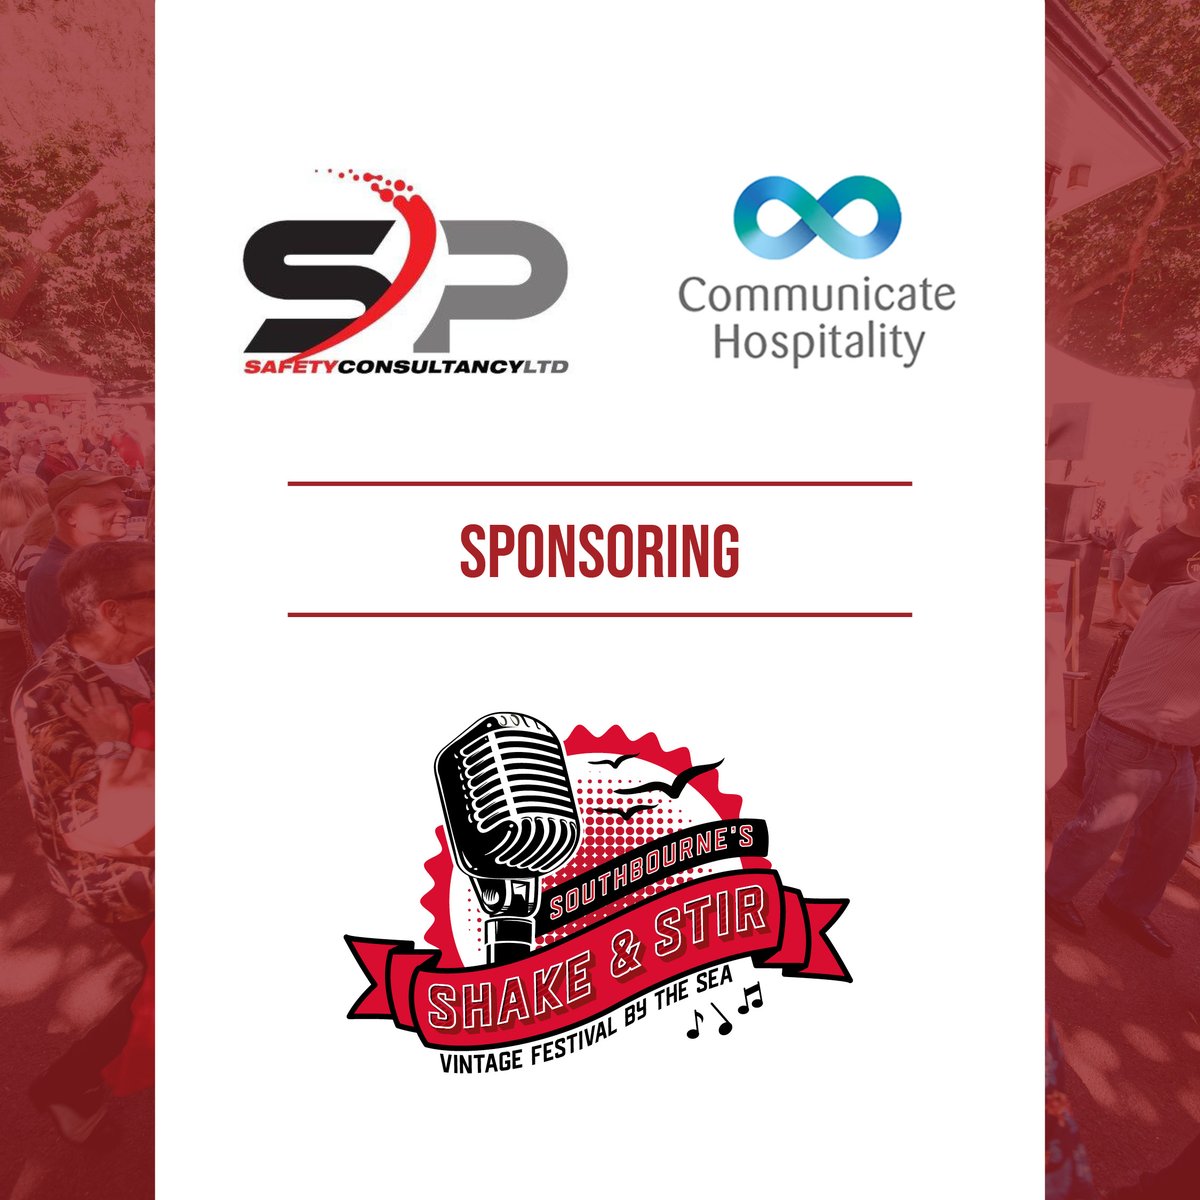 Thank you to our sponsors SP Safety Consultancy and Communicate Hospitality for sponsoring this year's event and helping ensure it ran safely and smoothly! ✅